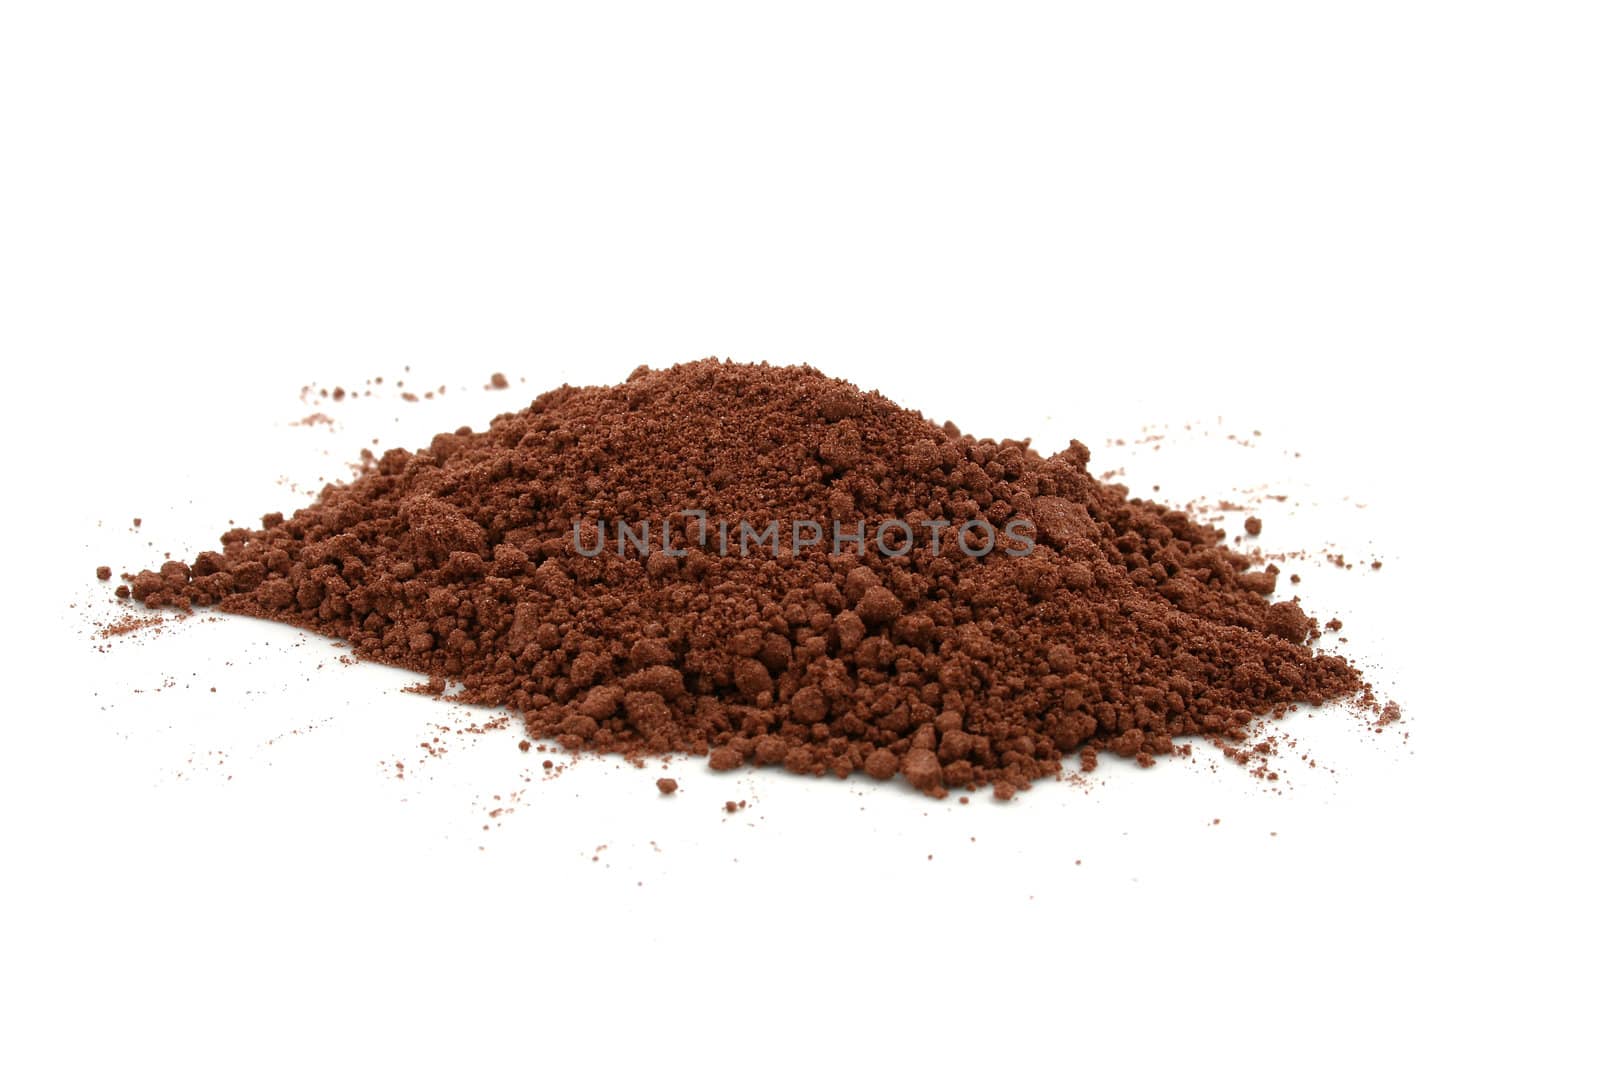 a pile of cocoa powder on white background